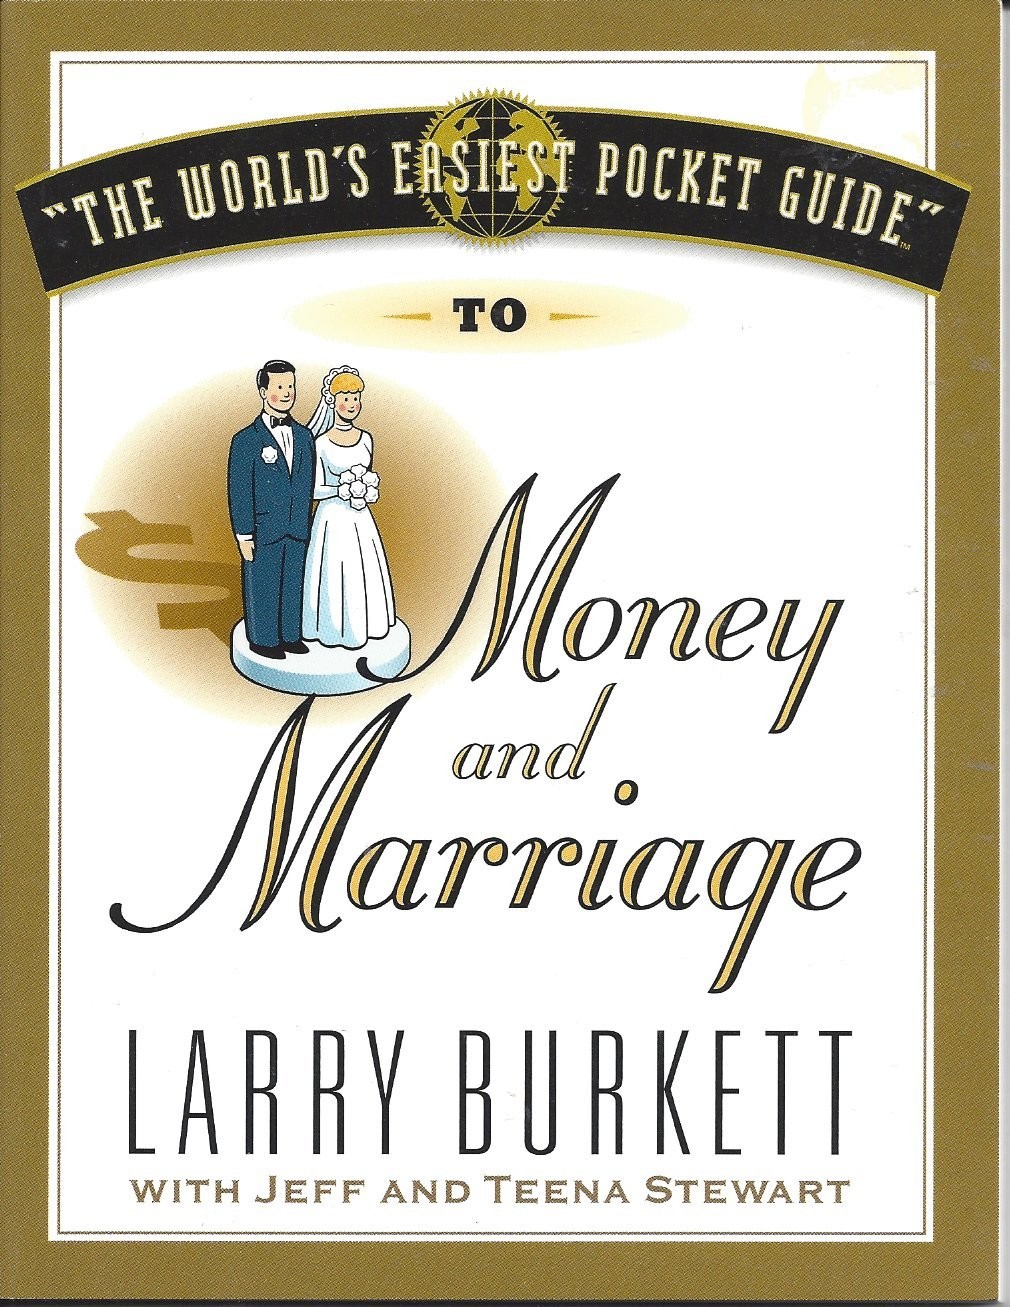 The World's Easiest Pocket Guide To Money And Marriage (2002) Front